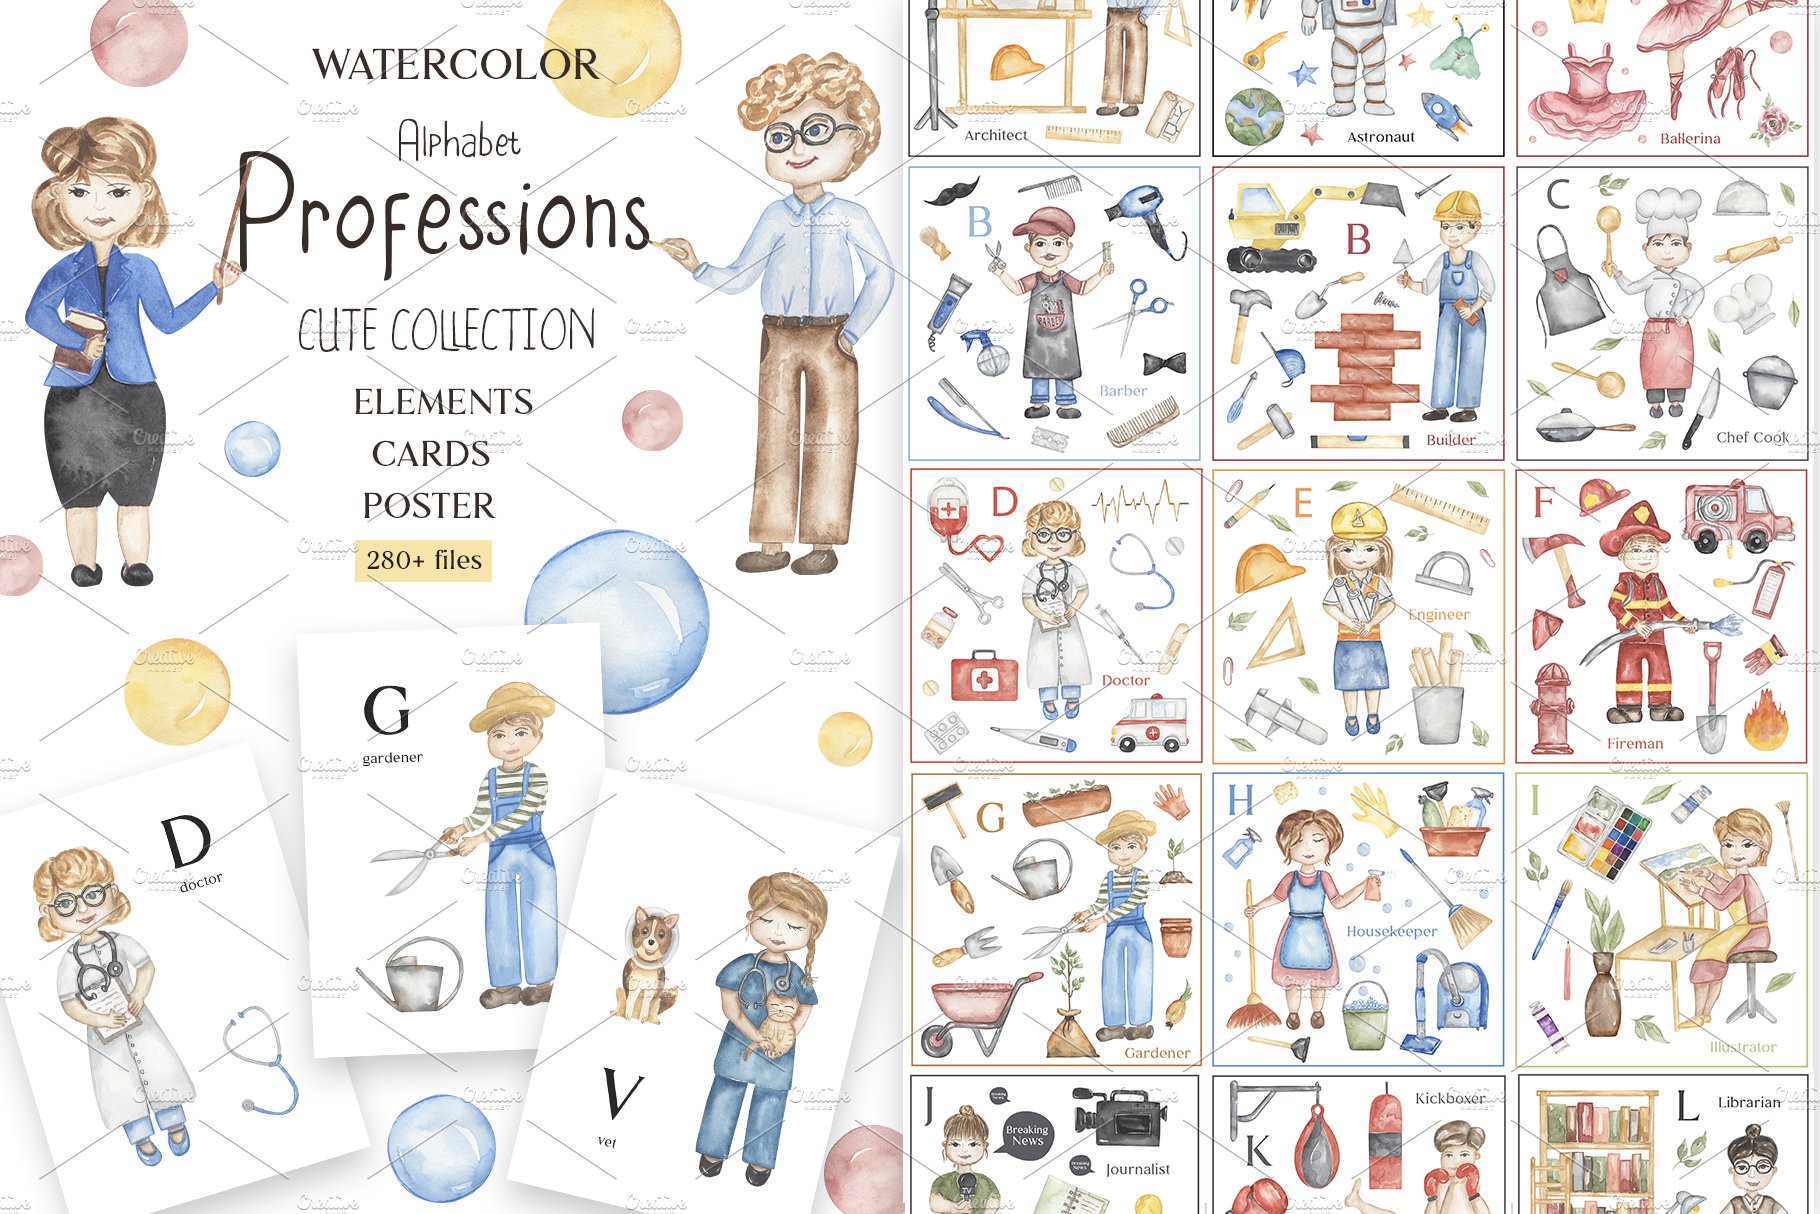 Watercolor Cute Alphabet Professions cover image.